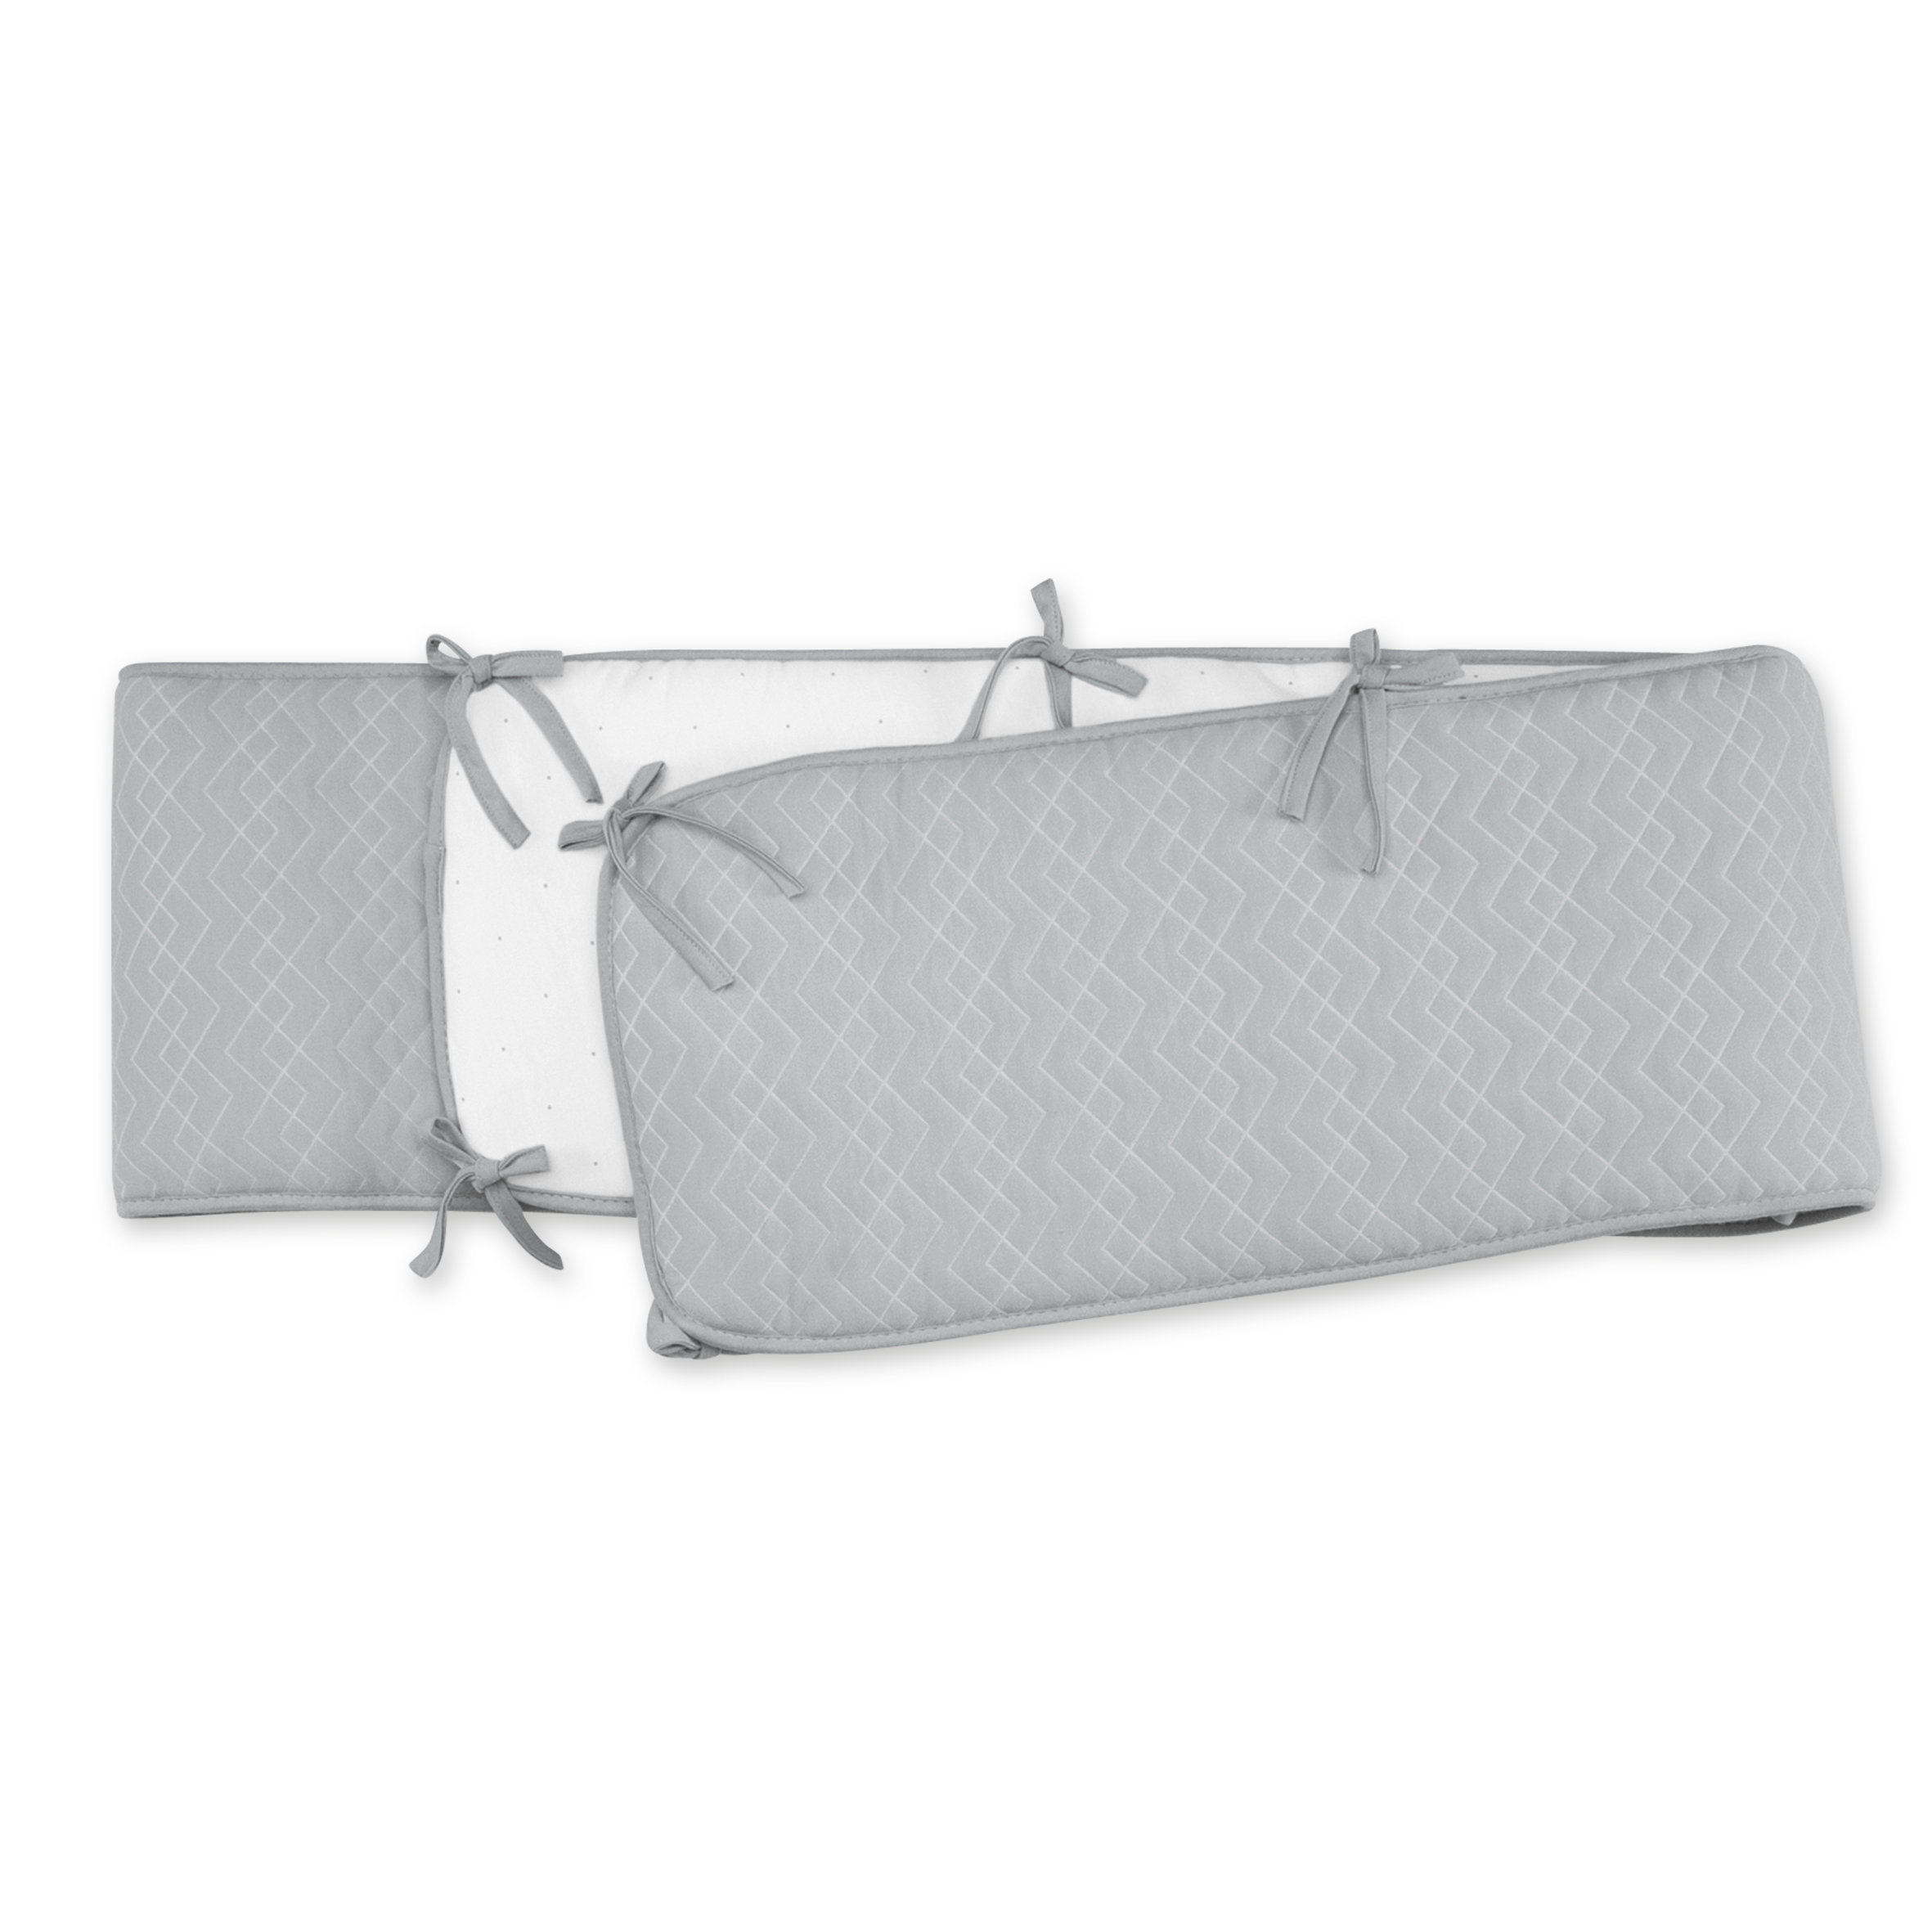 Protector de parque Pady quilted jersey + jersey 75x95x28cm OSAKA Gris medio